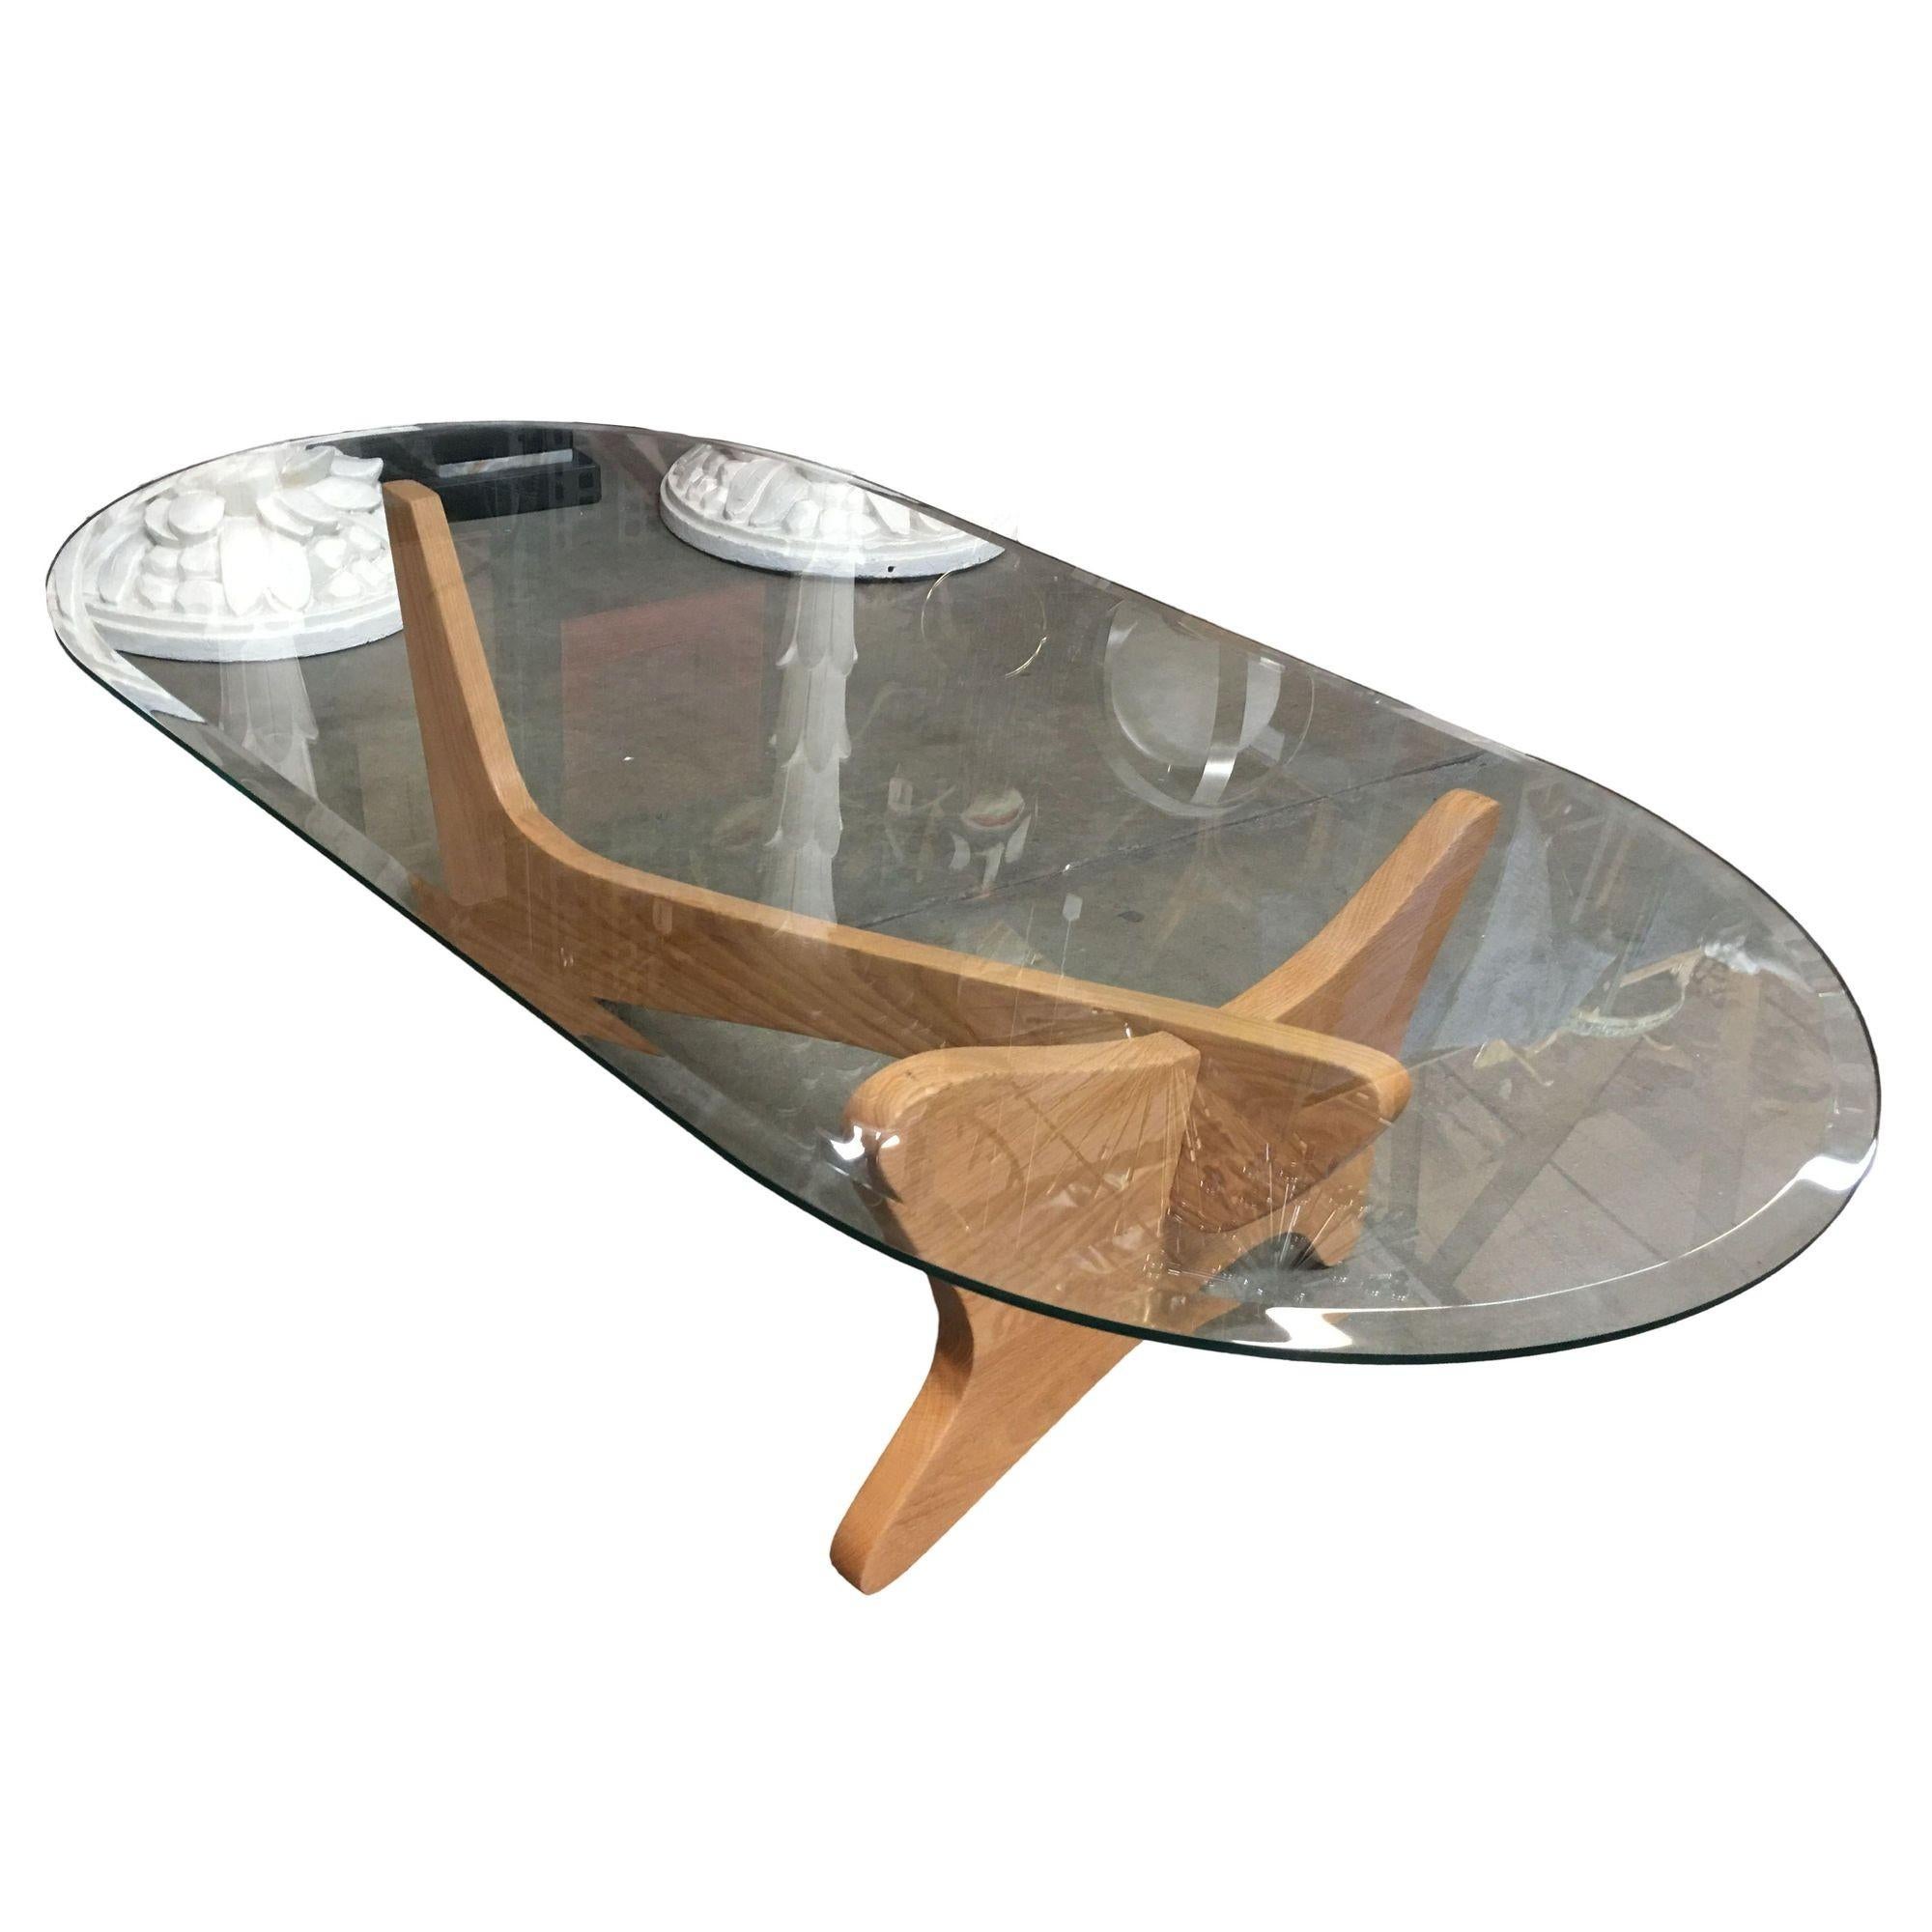 American Mid-Century Modern Noguchi Style Oval Glass Coffee Table For Sale